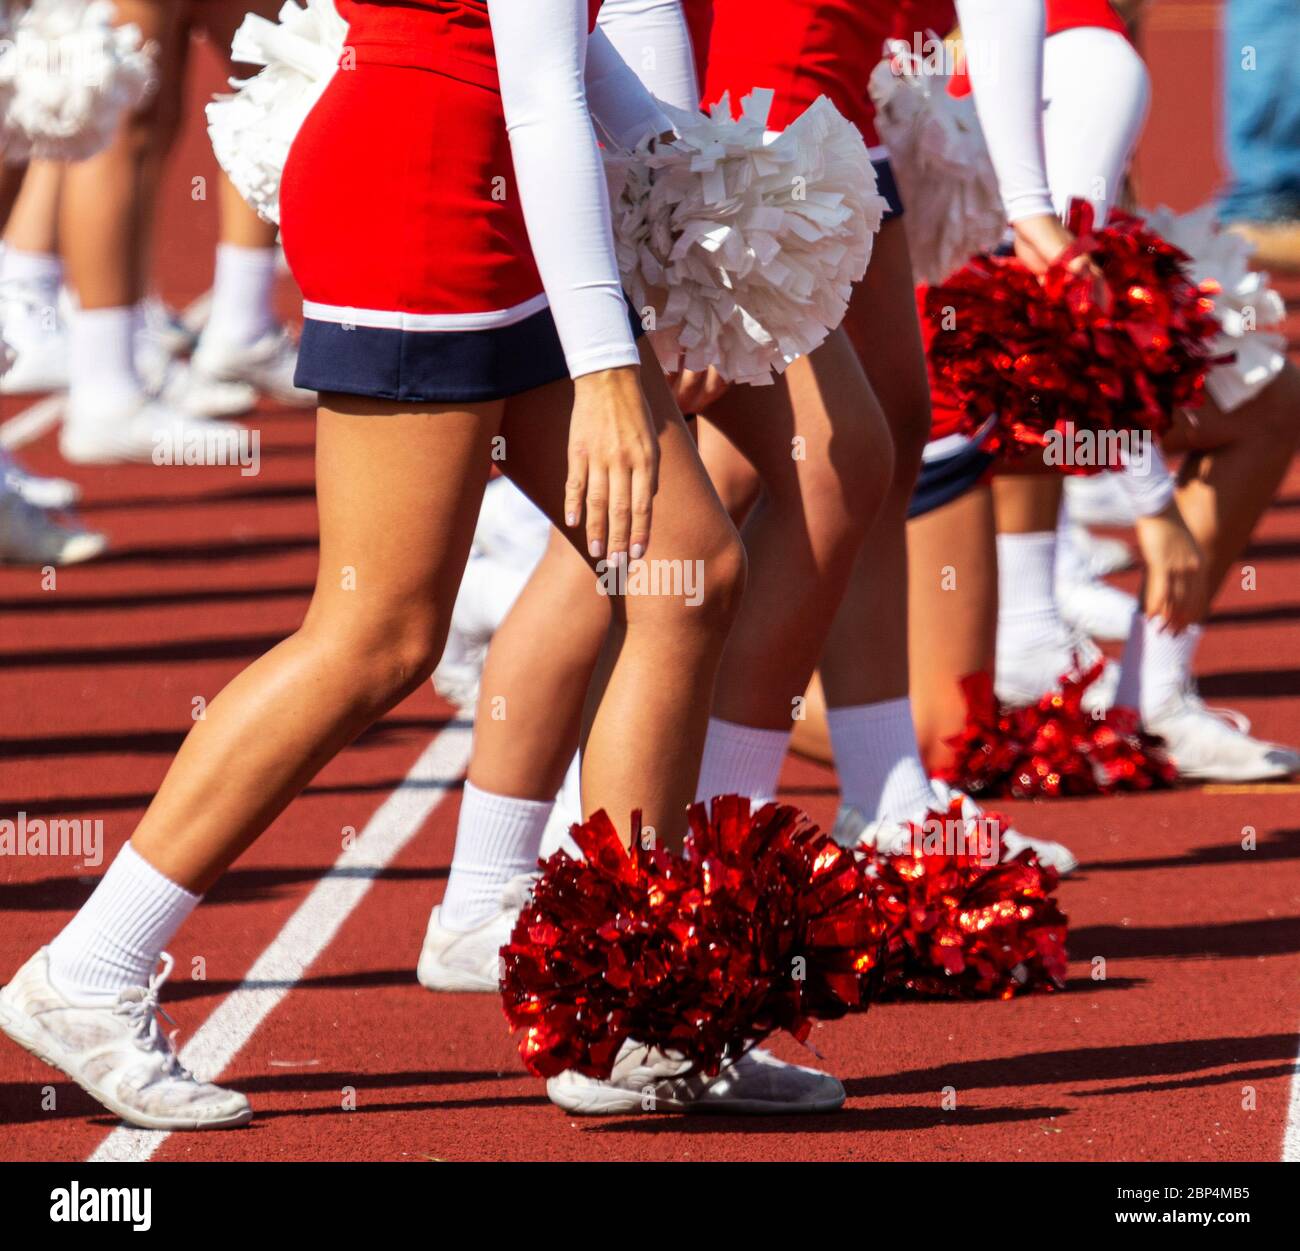 A high shcool cheerleader in a red white and blue uniform dropping her pom pom on to the track after performing. Stock Photo